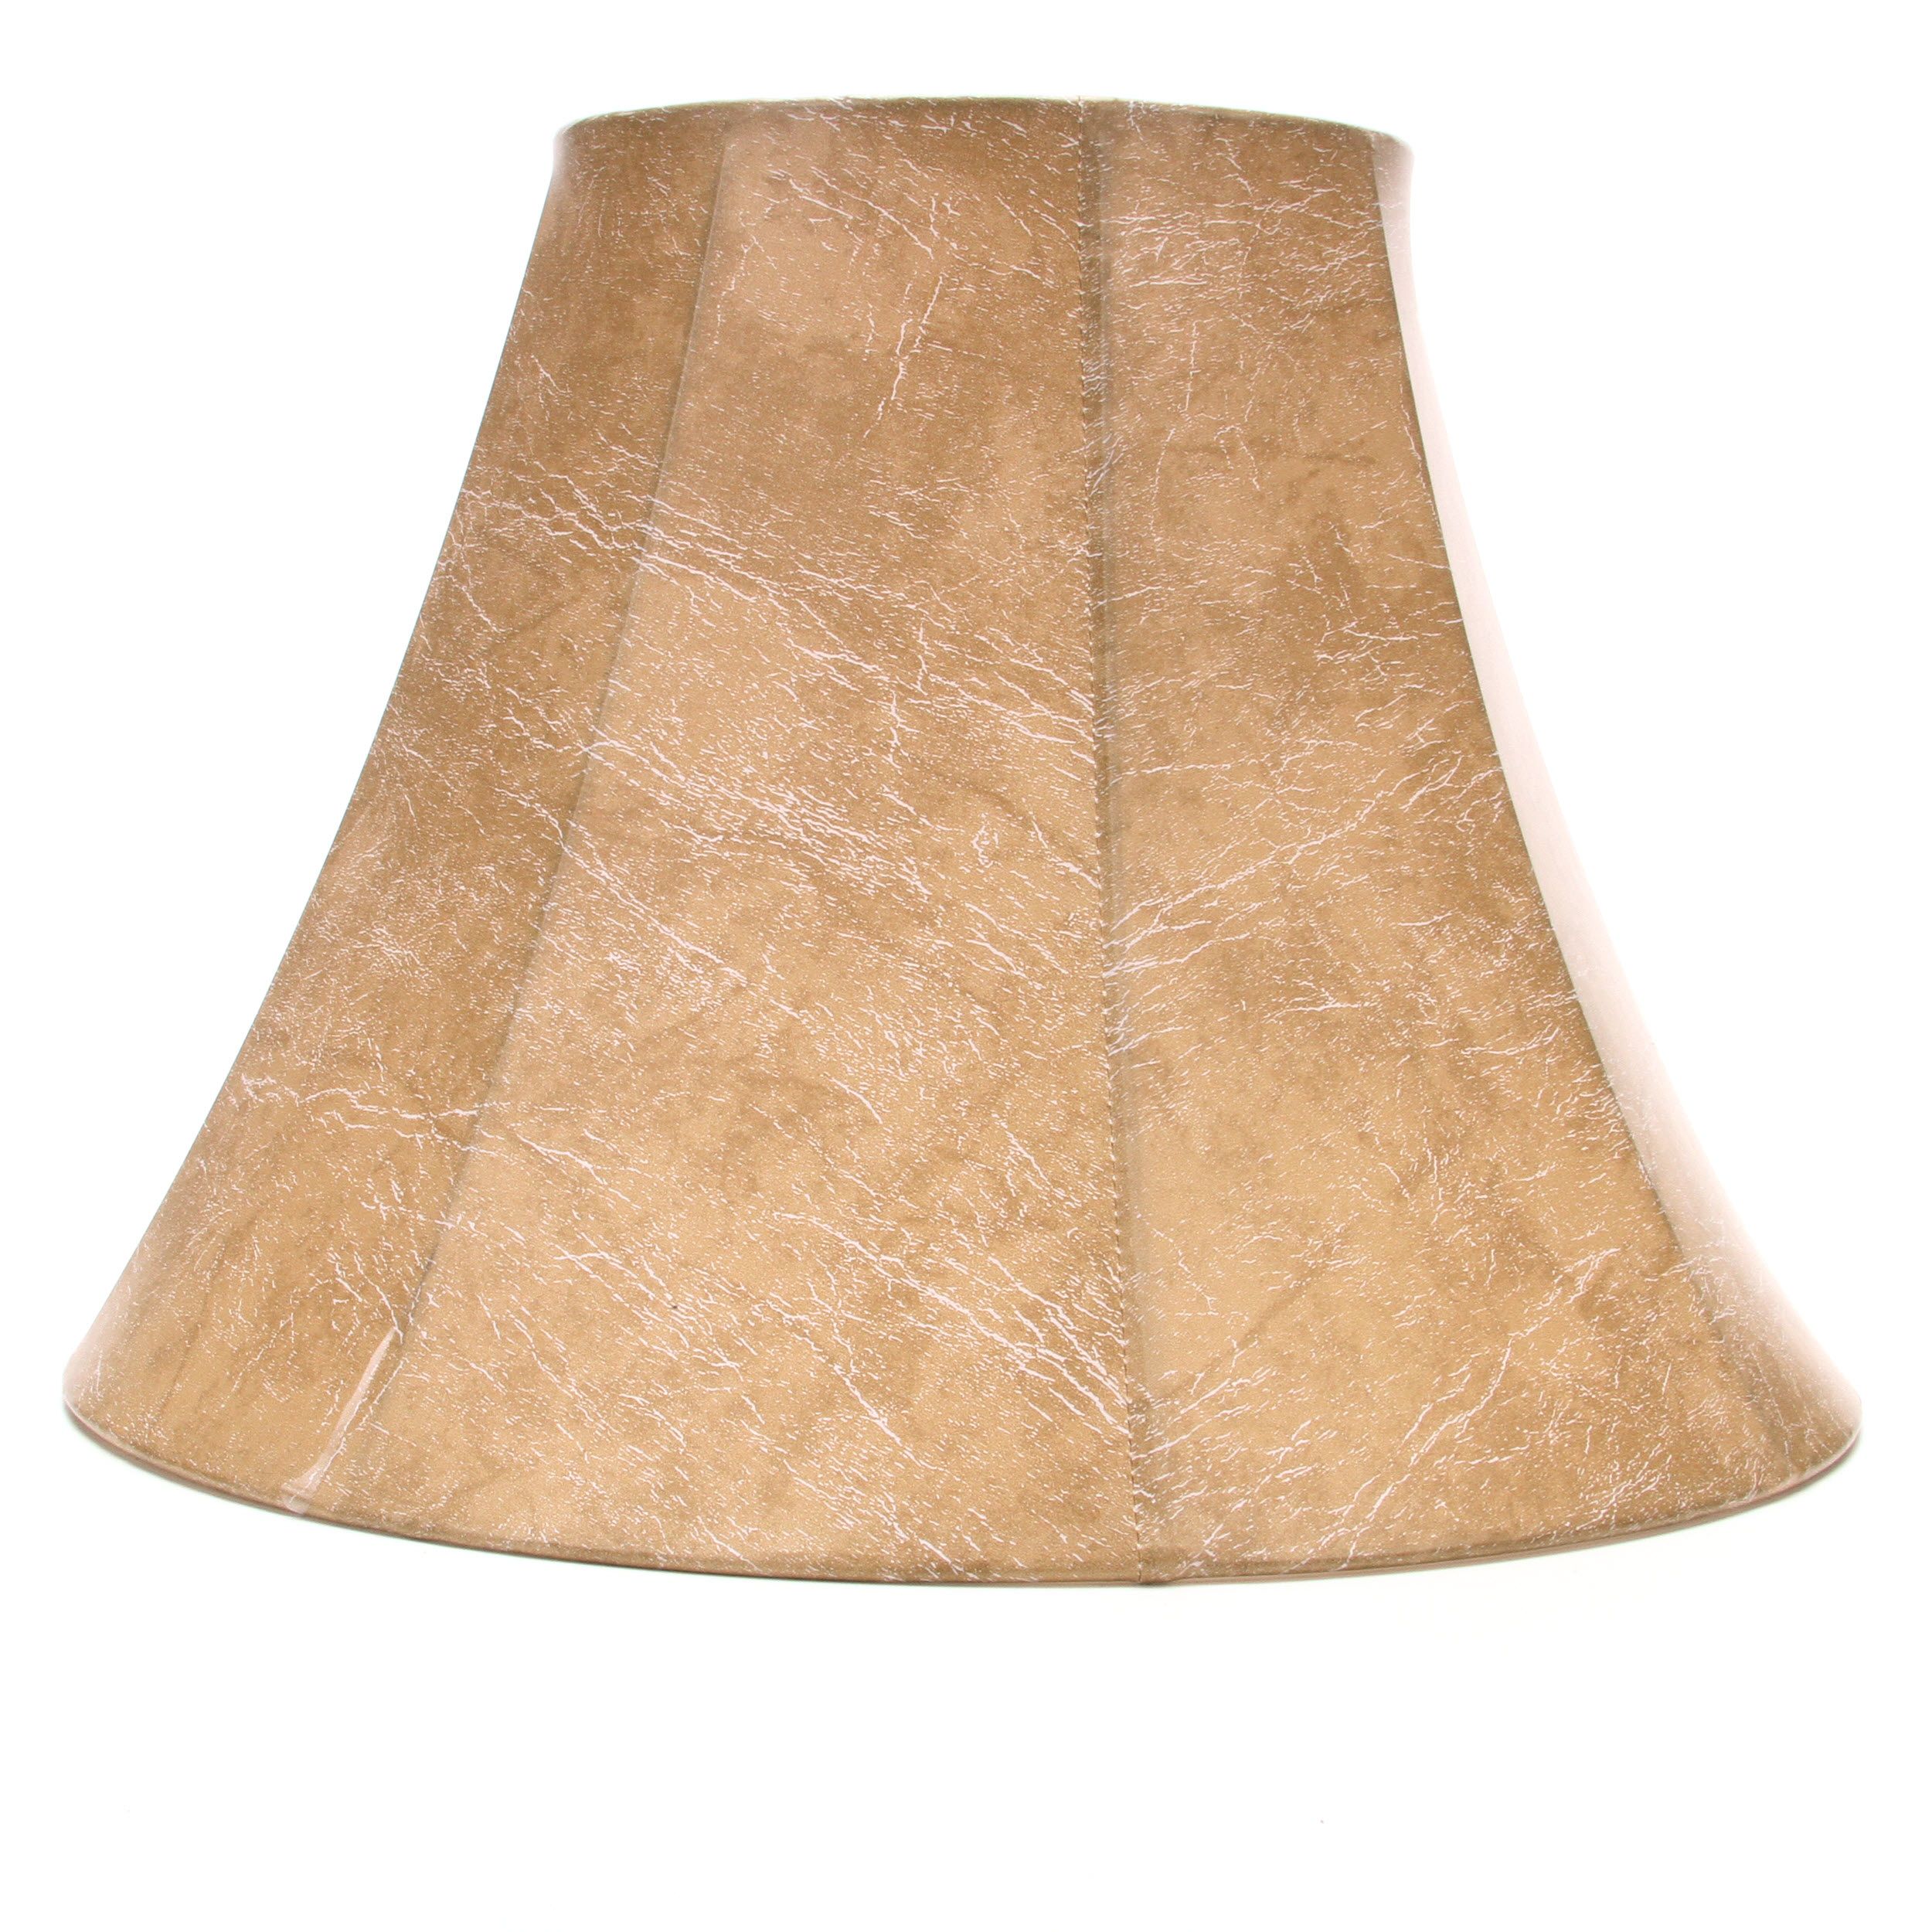 17" Rustic Faux Leather Bell Lamp Shades 